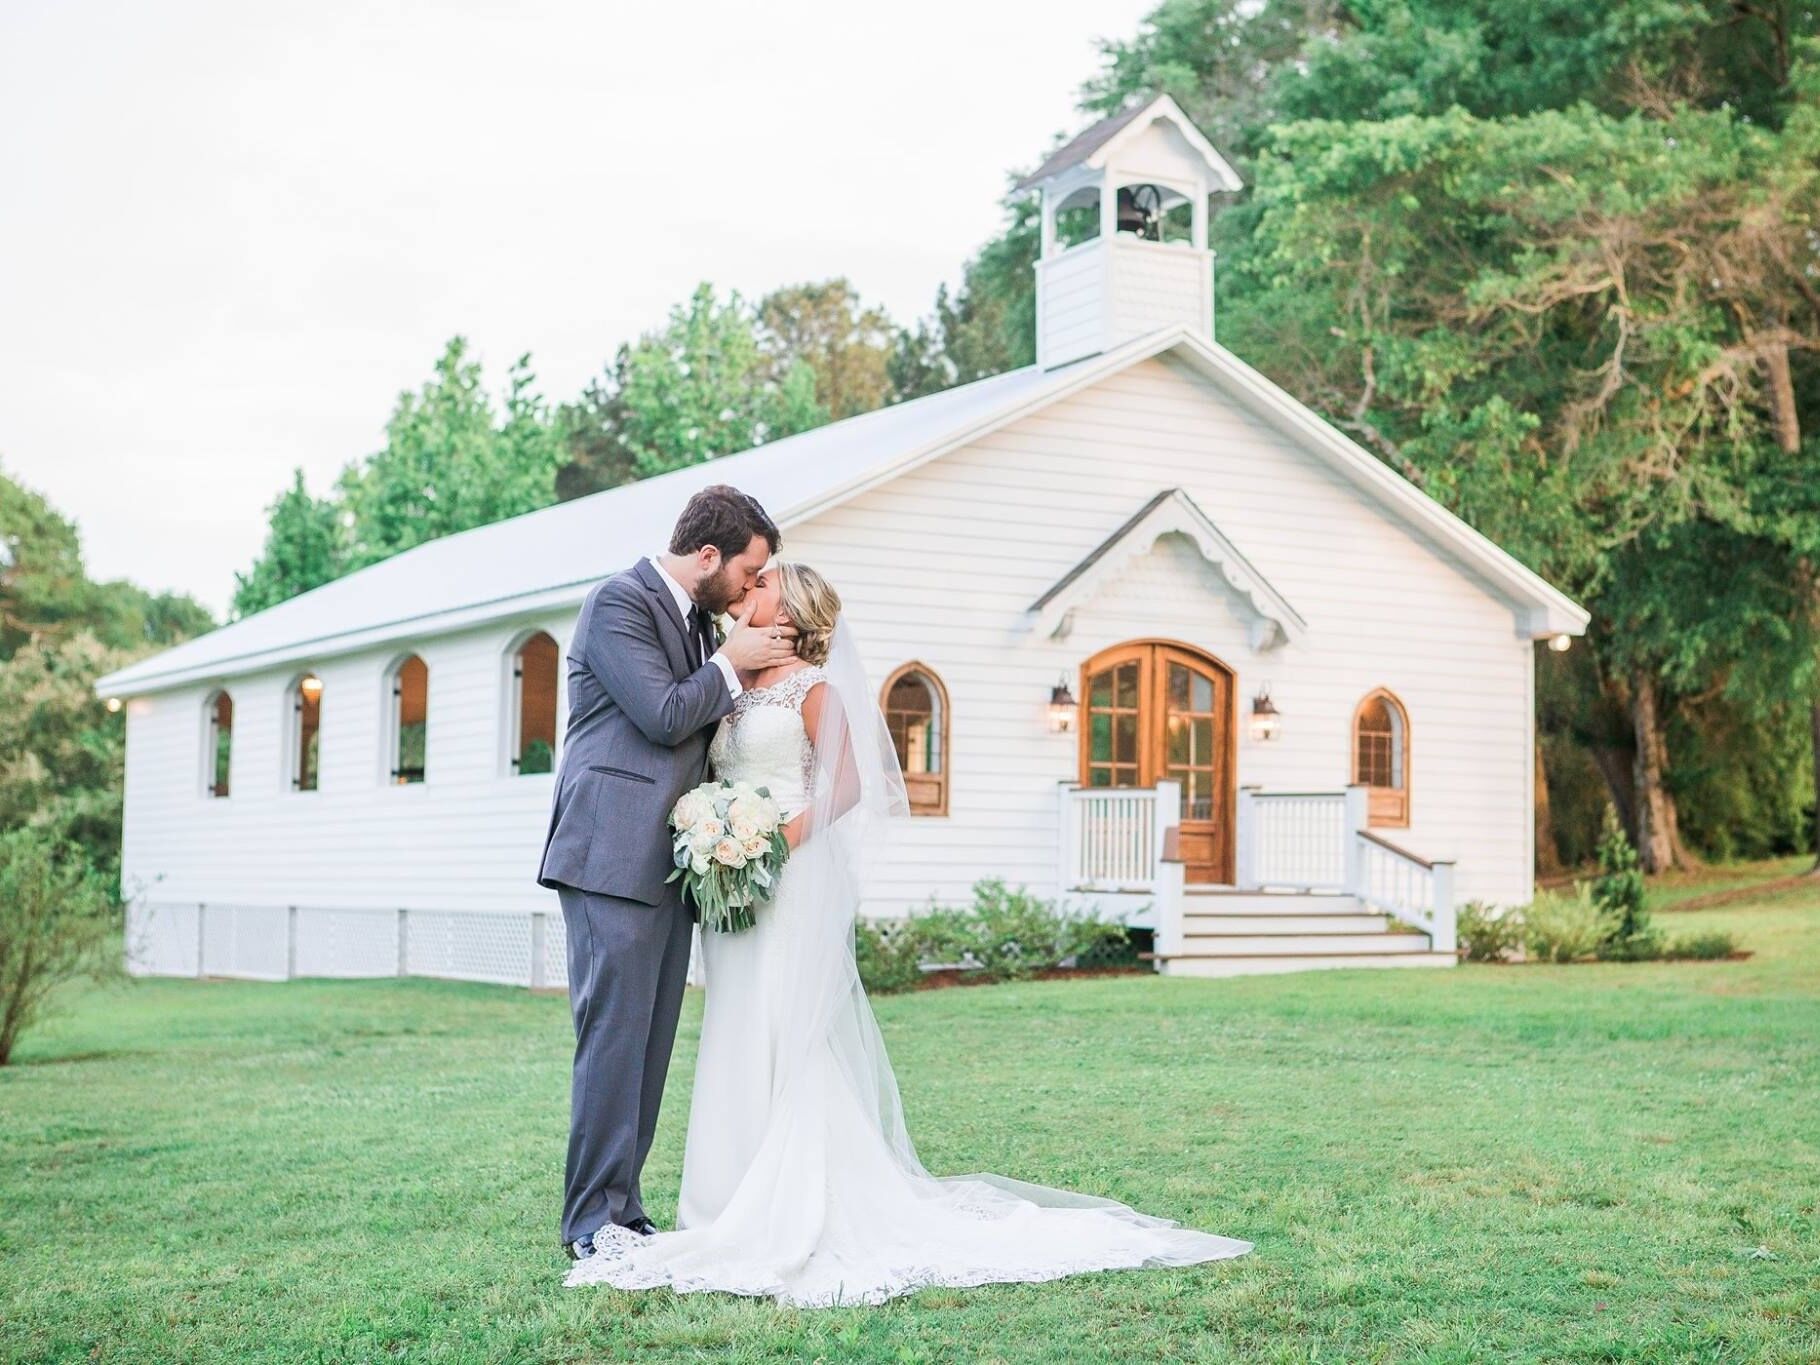 Couple kissing for a wedding portrait outside the charming white venue